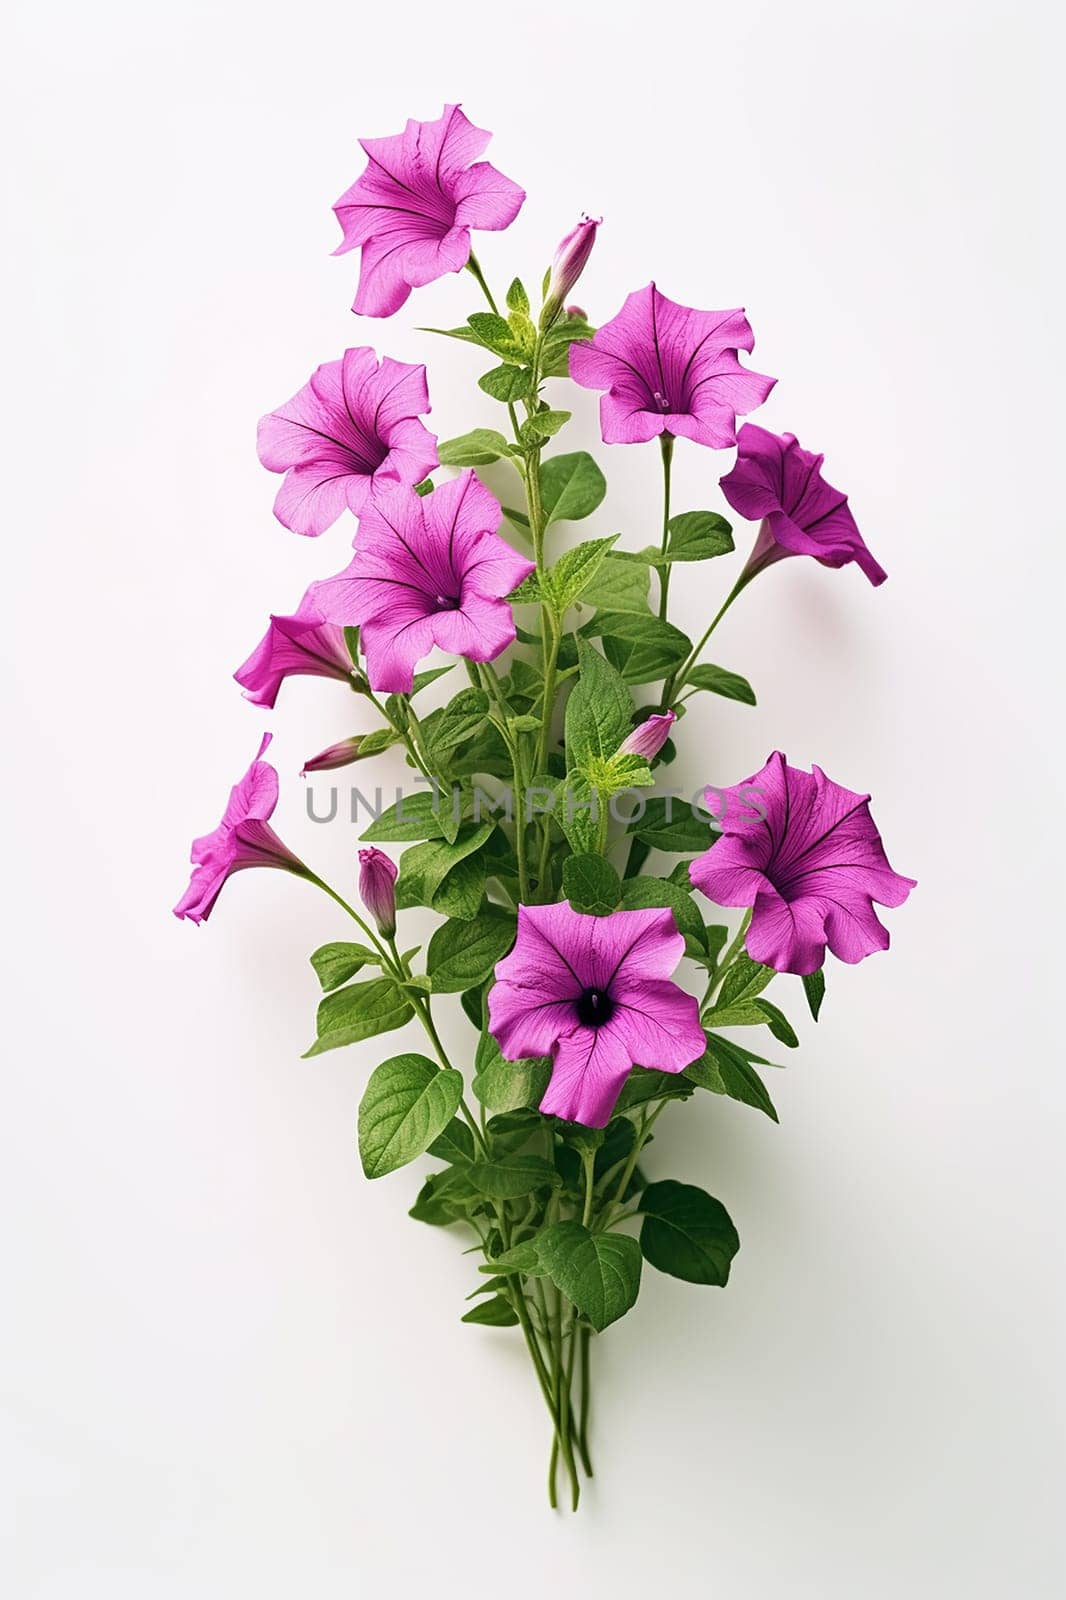 Purple petunia flowers with green stems against white background by Hype2art